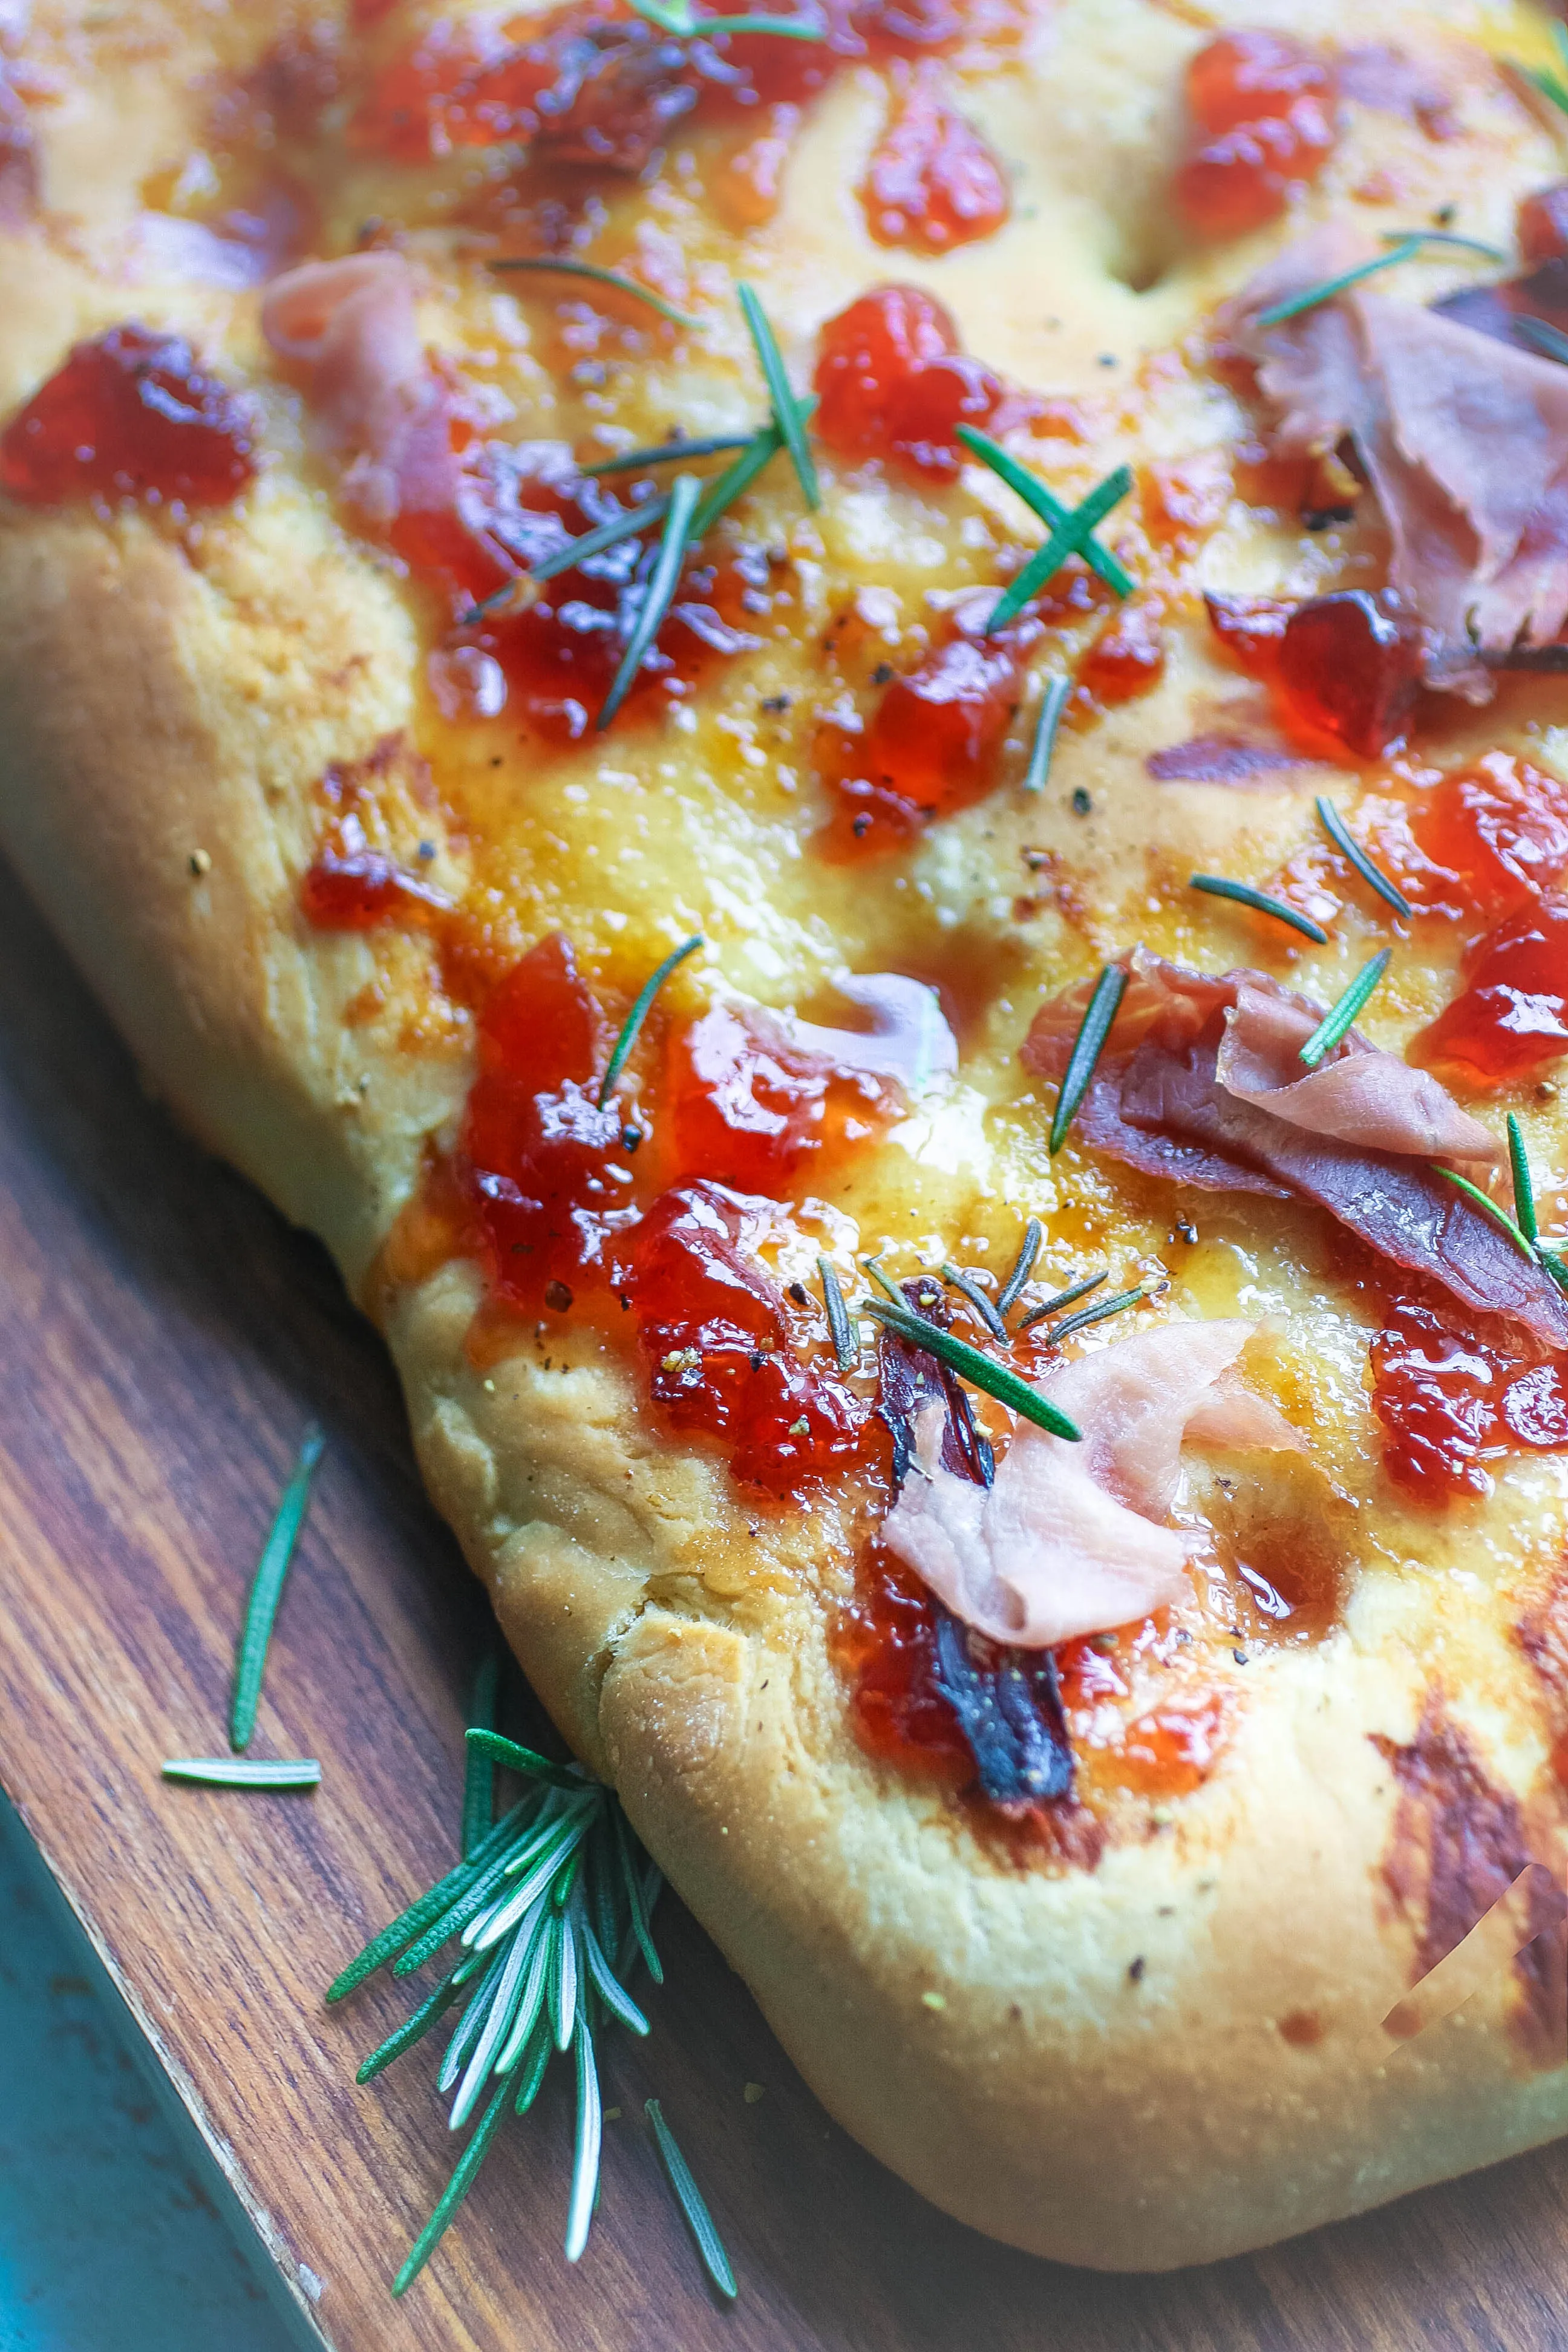 Cherry-Prosciutto Focaccia is sweet, salty, and delicious! Cherry-Prosciutto Focaccia is a delightful treat any day of the week!